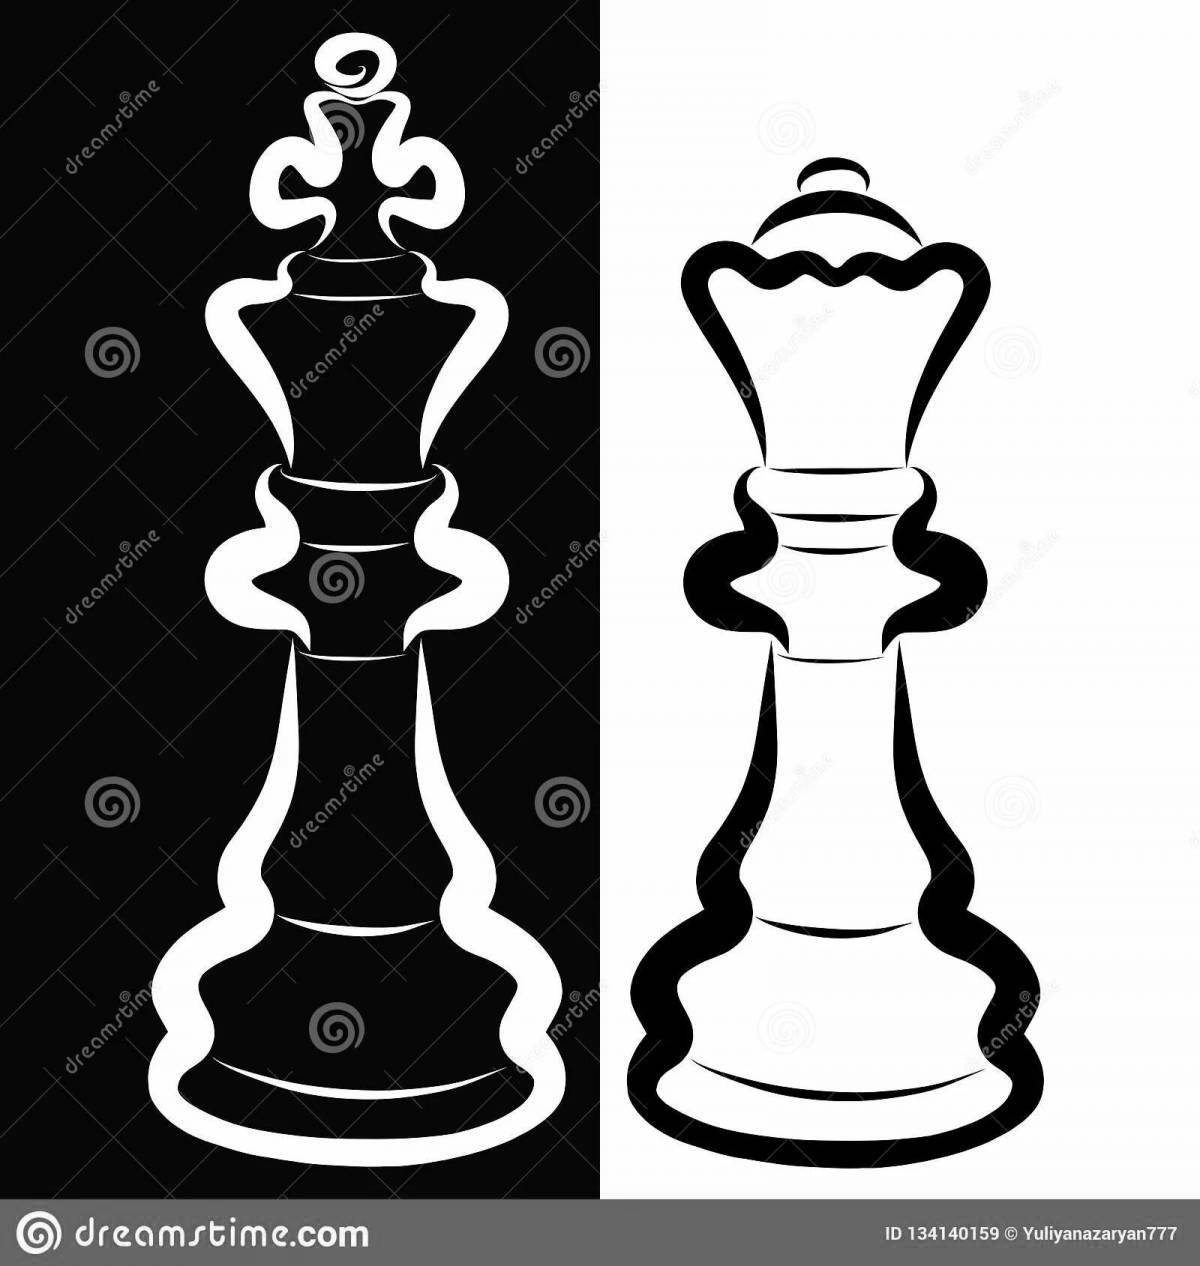 Coloring page glamor chess queen